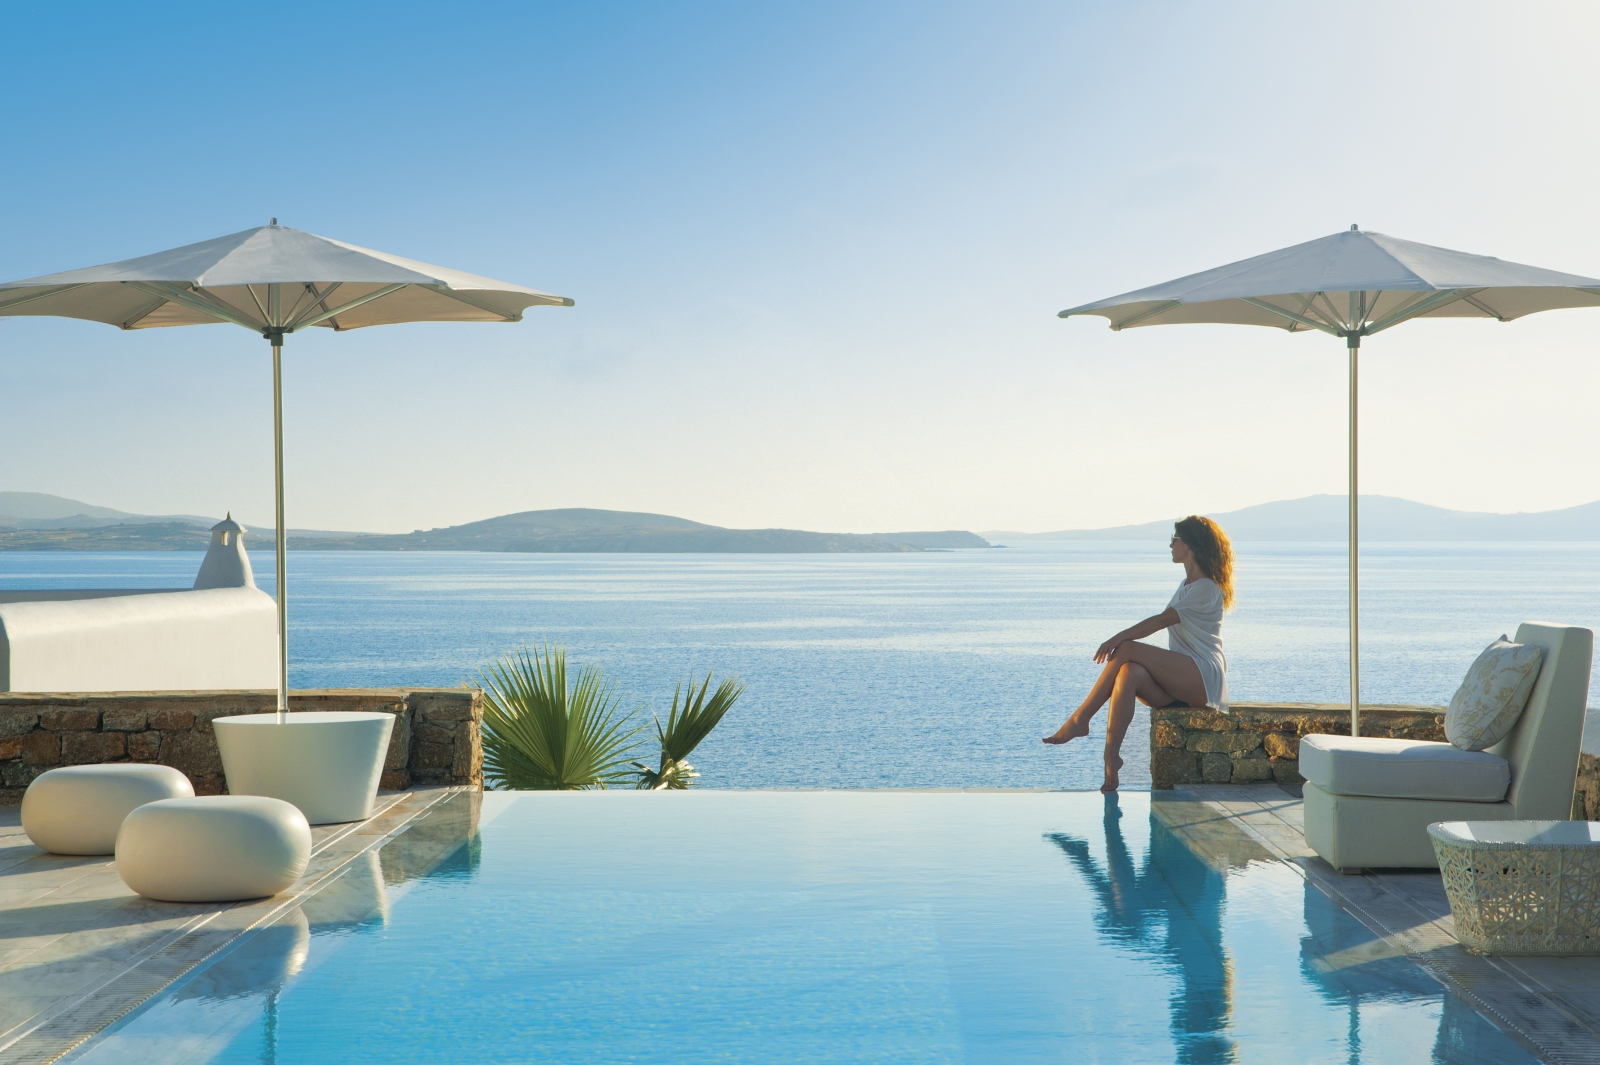 Guest sitting by the infinity pool enjoying the views over the Aegean Sea at luxury resort Mykonos Grand, Greece